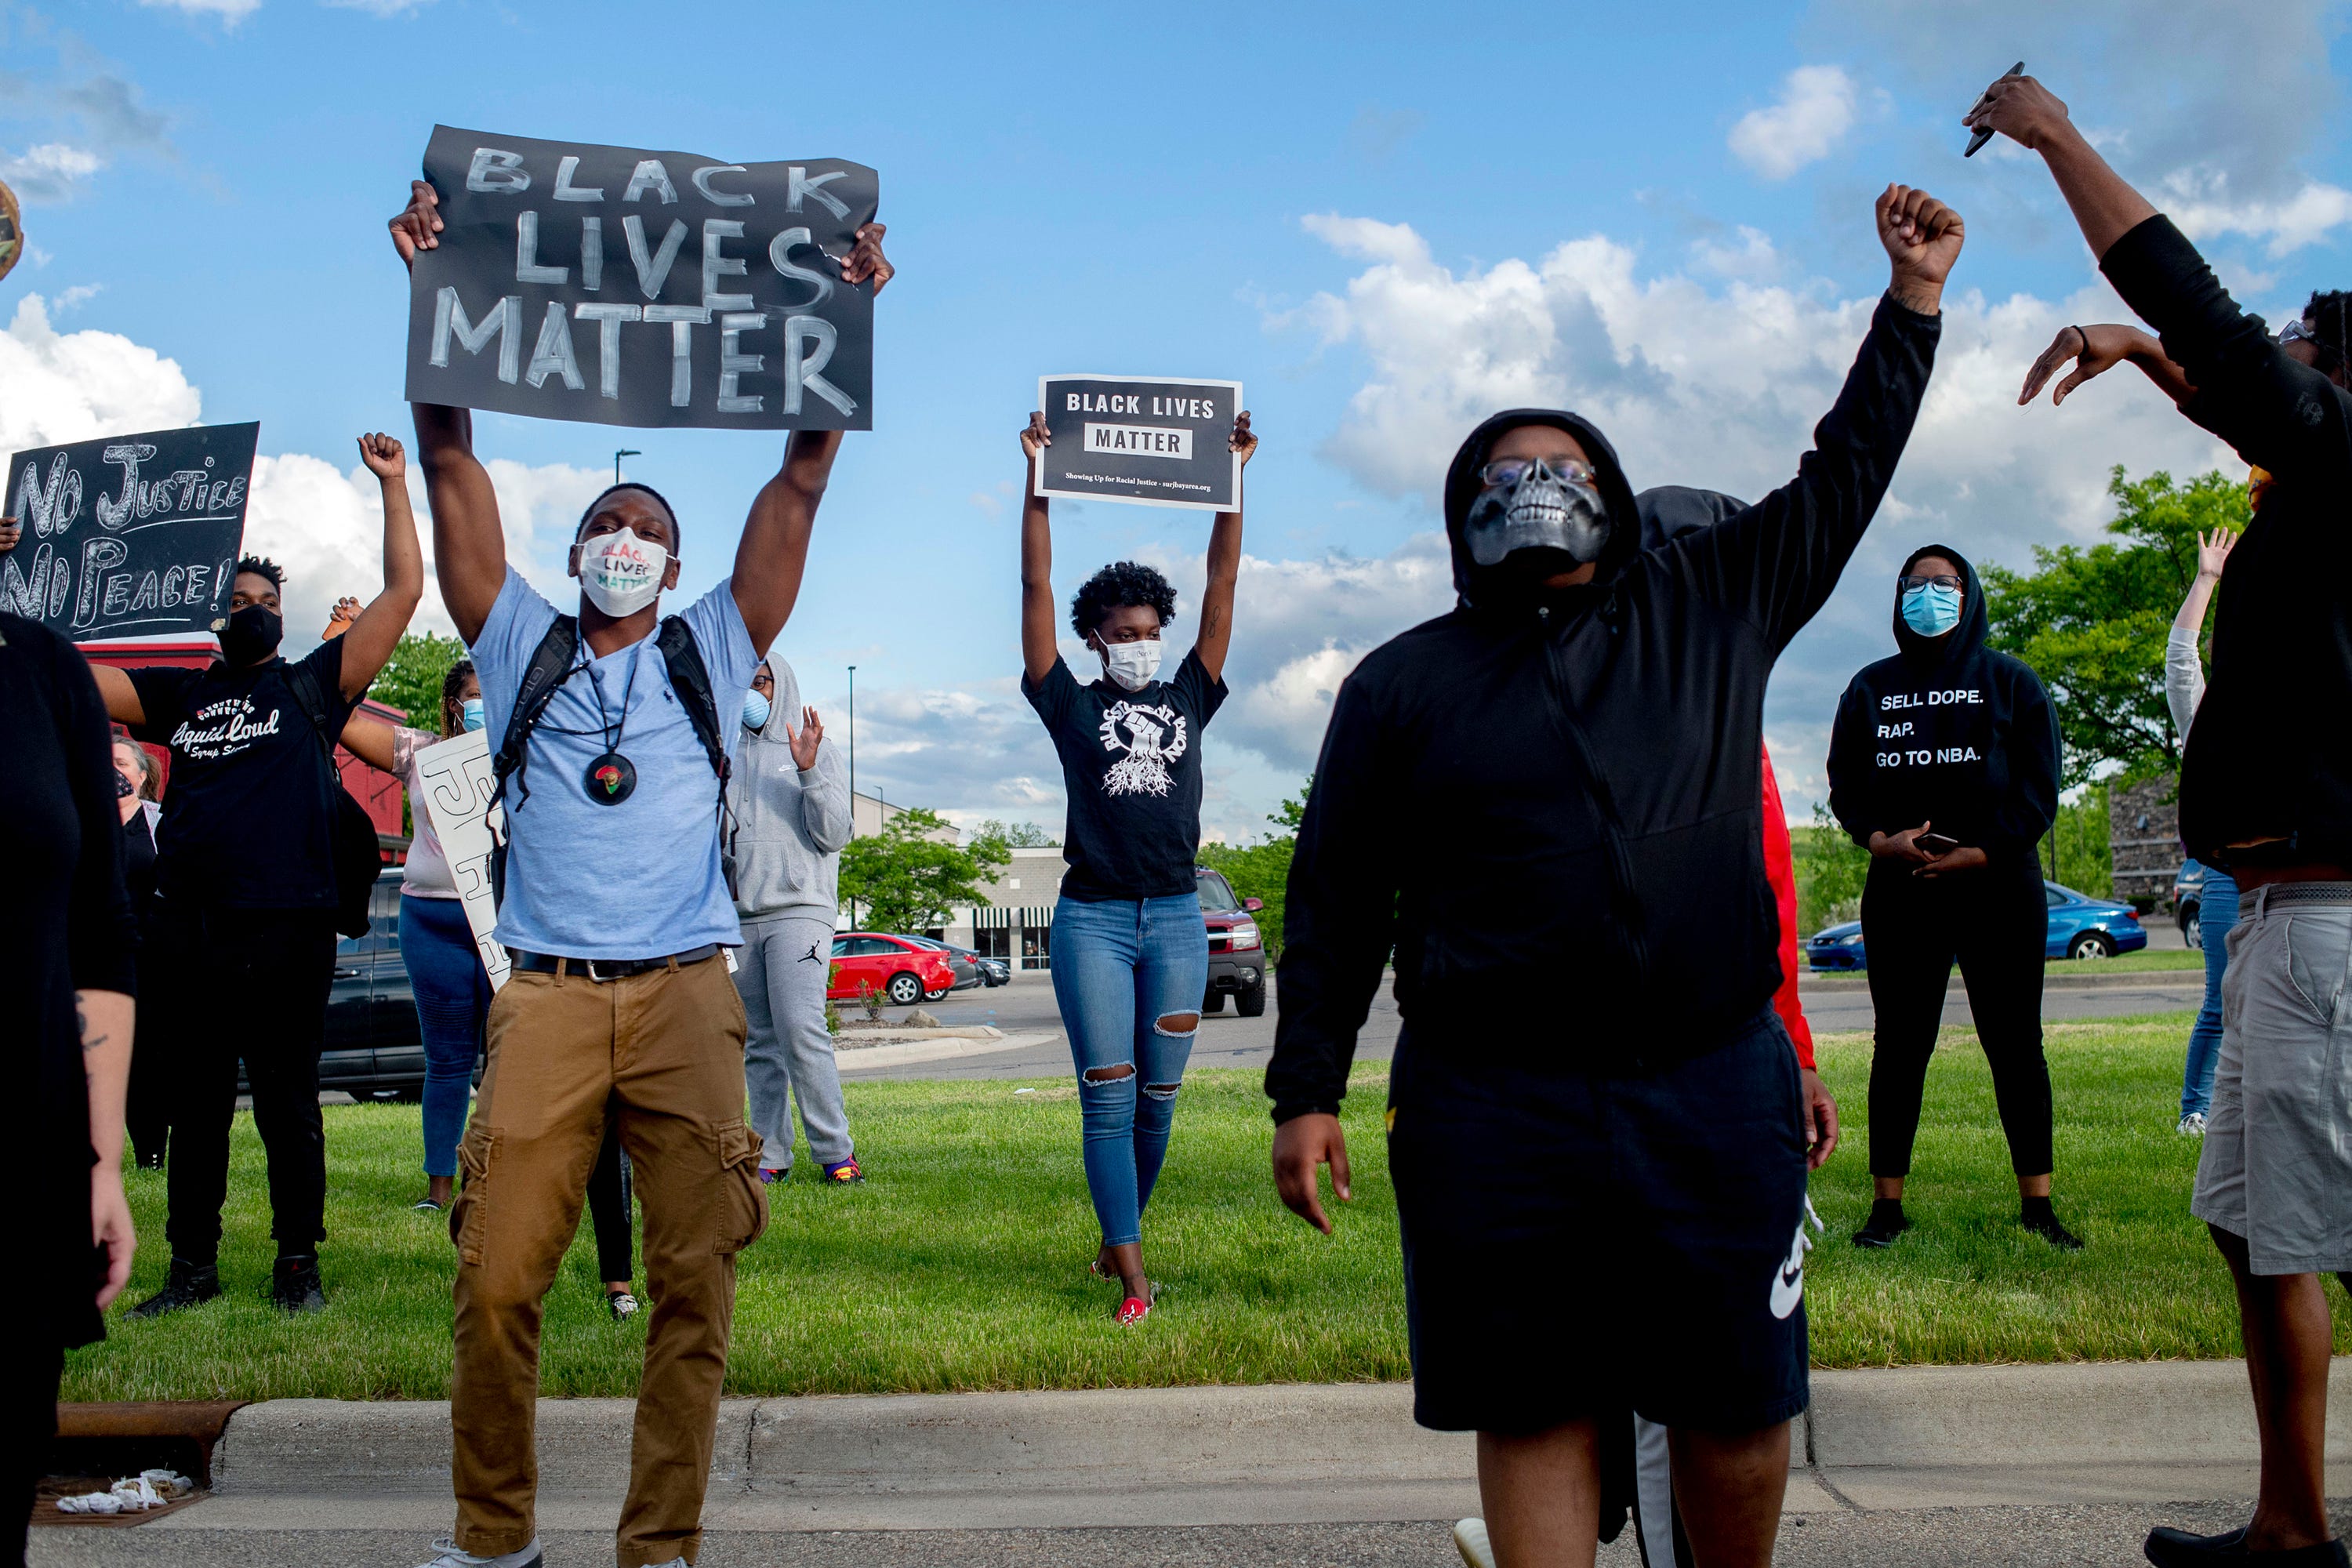 Protesters chant as they march during a peaceful protest seeking justice for George Floyd on Saturday, May 30, 2020 on Miller Road in Flint Township, M.I.  Floyd died in police custody on Memorial Day in Minneapolis. (Jake May/The Flint Journal via AP)